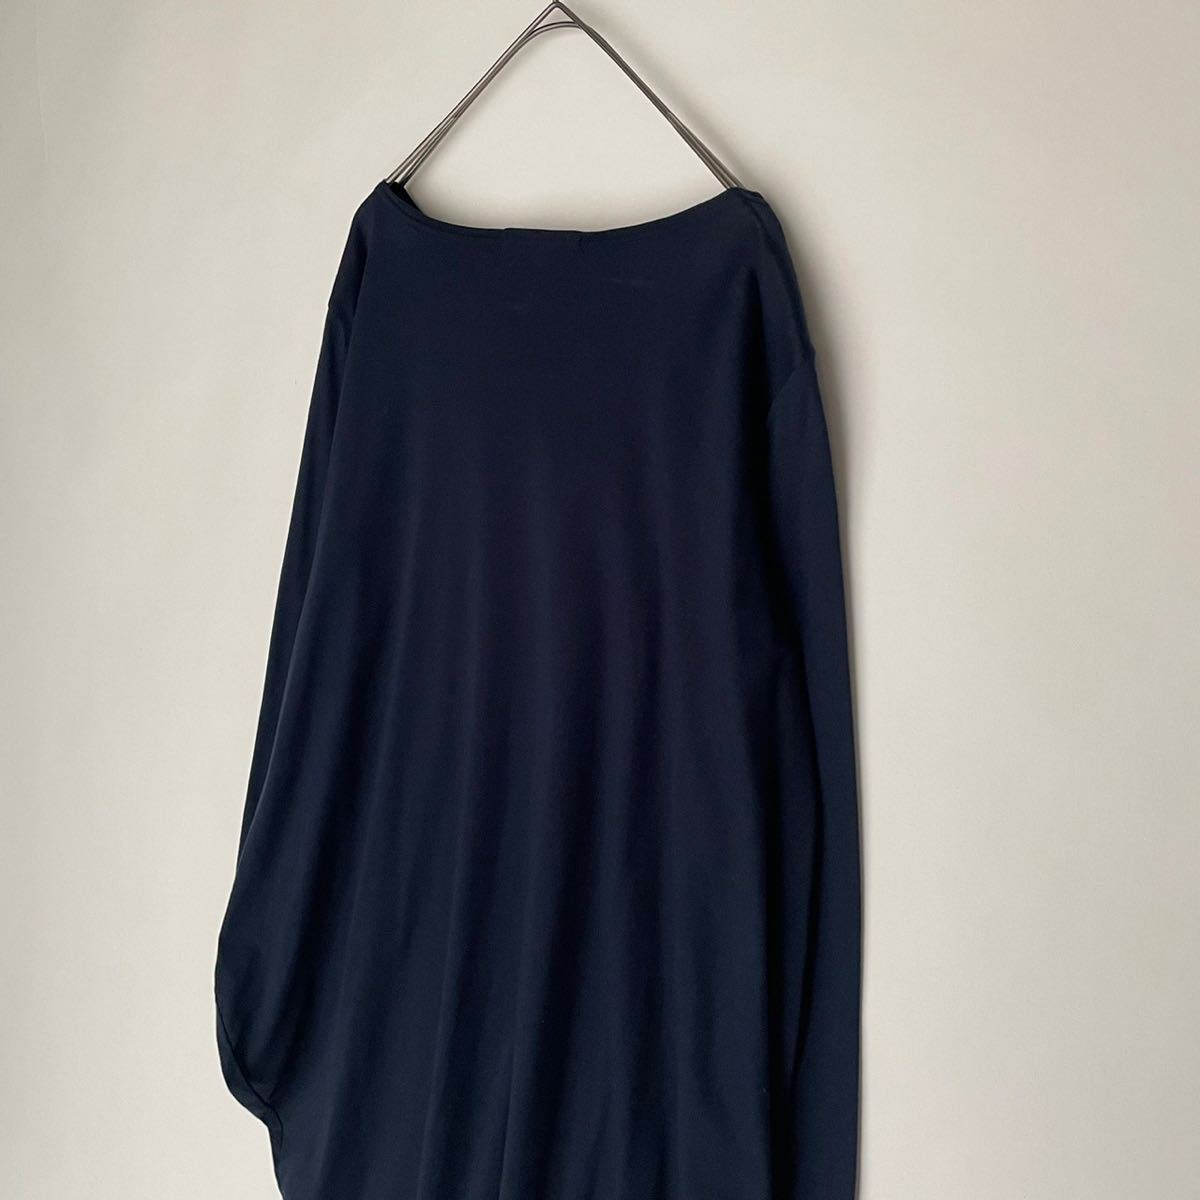 mizuiro ind light blue India tunic One-piece ko Kuhn cut and sewn boat neck long sleeve cotton 100% easy . navy size FREE